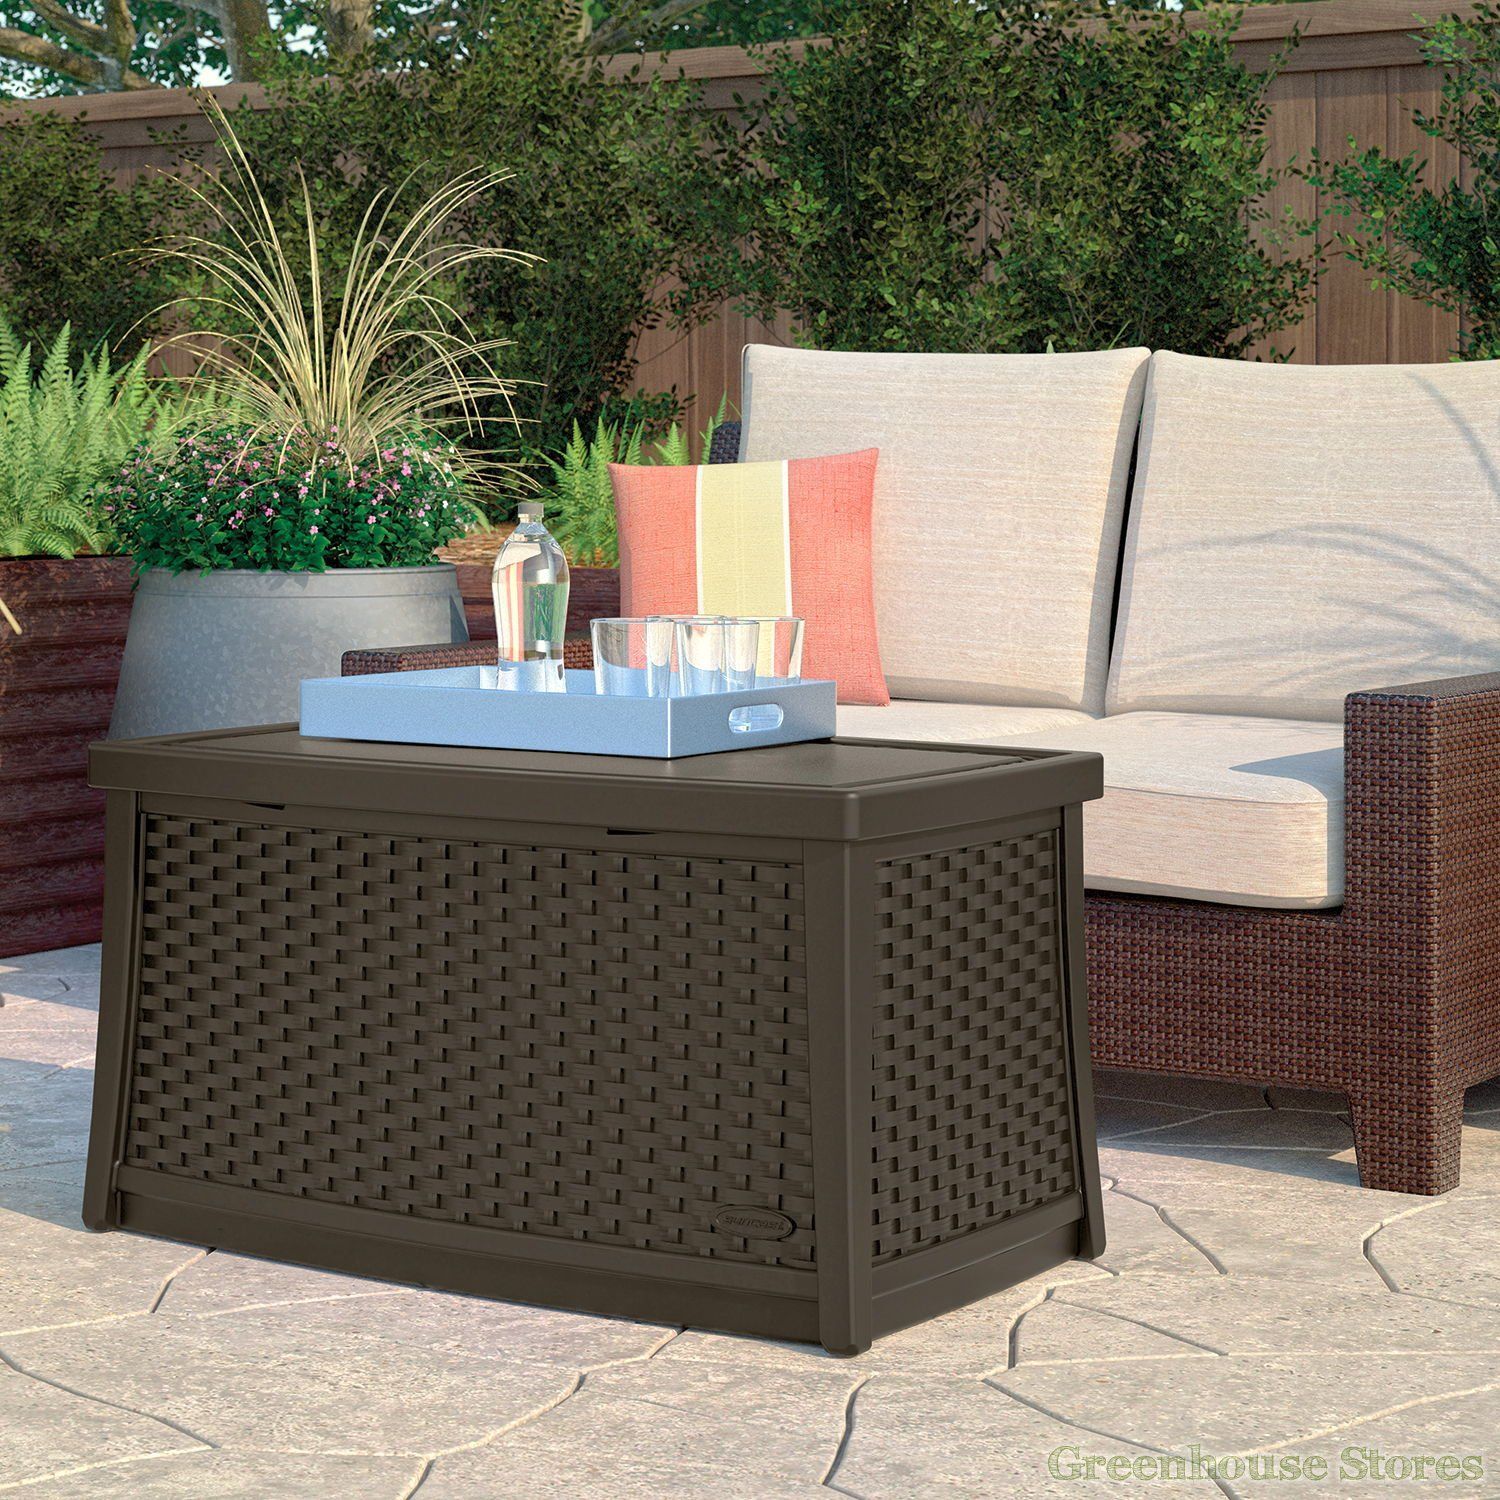 Suncast Coffee Table With Storage Box | Outdoor Coffee Tables, Coffee Regarding Outdoor Coffee Tables With Storage (View 7 of 20)